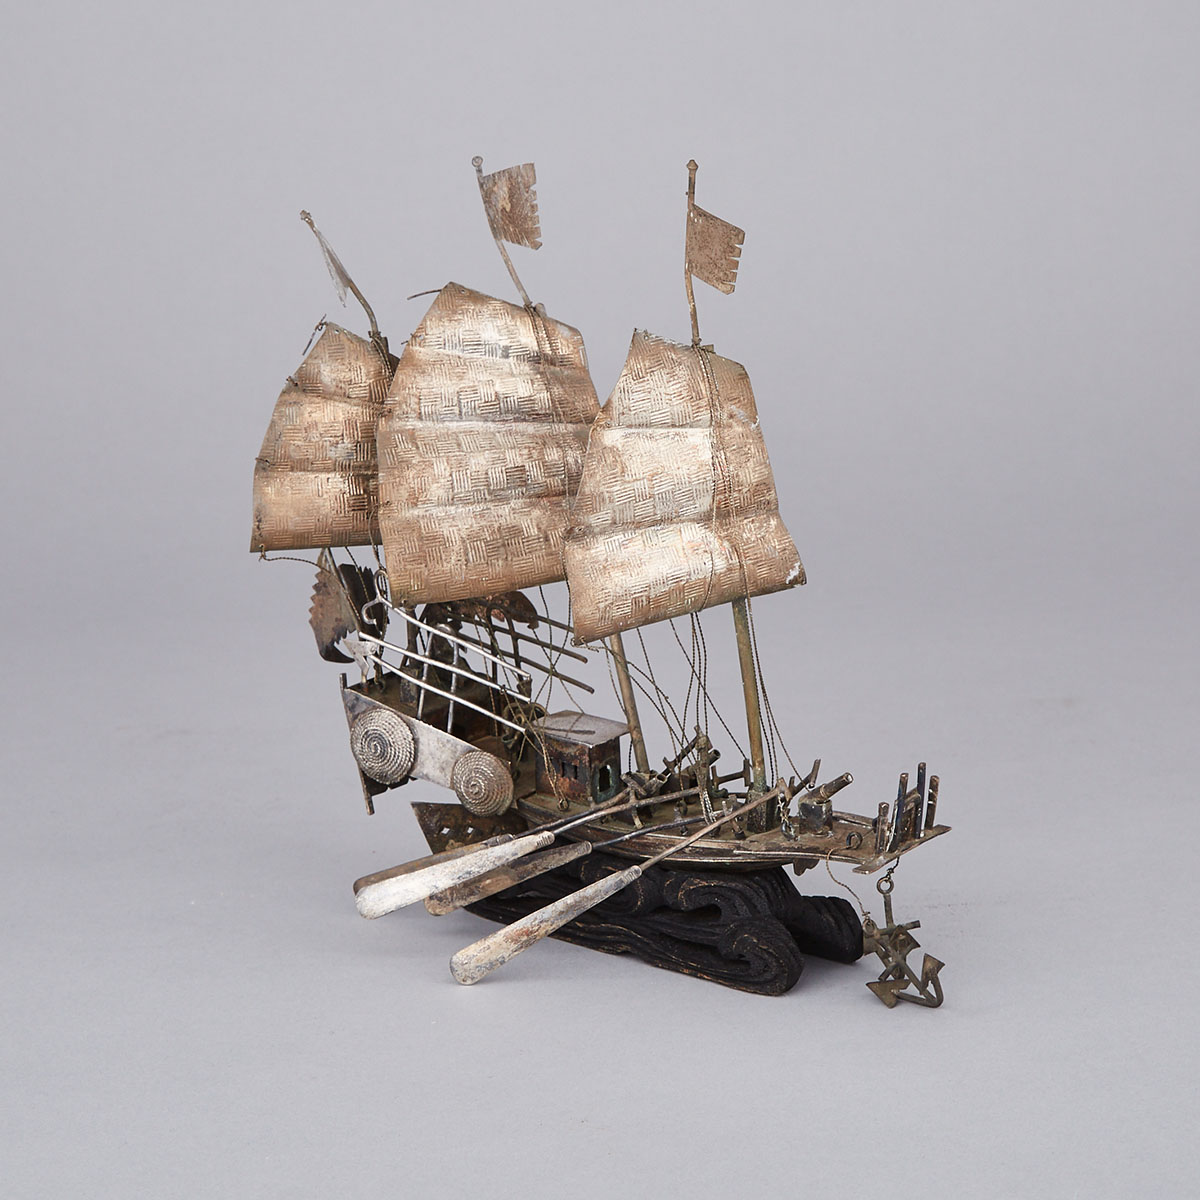 Chinese Silver Model of a Three-Masted Sailing Ship, early 20th century